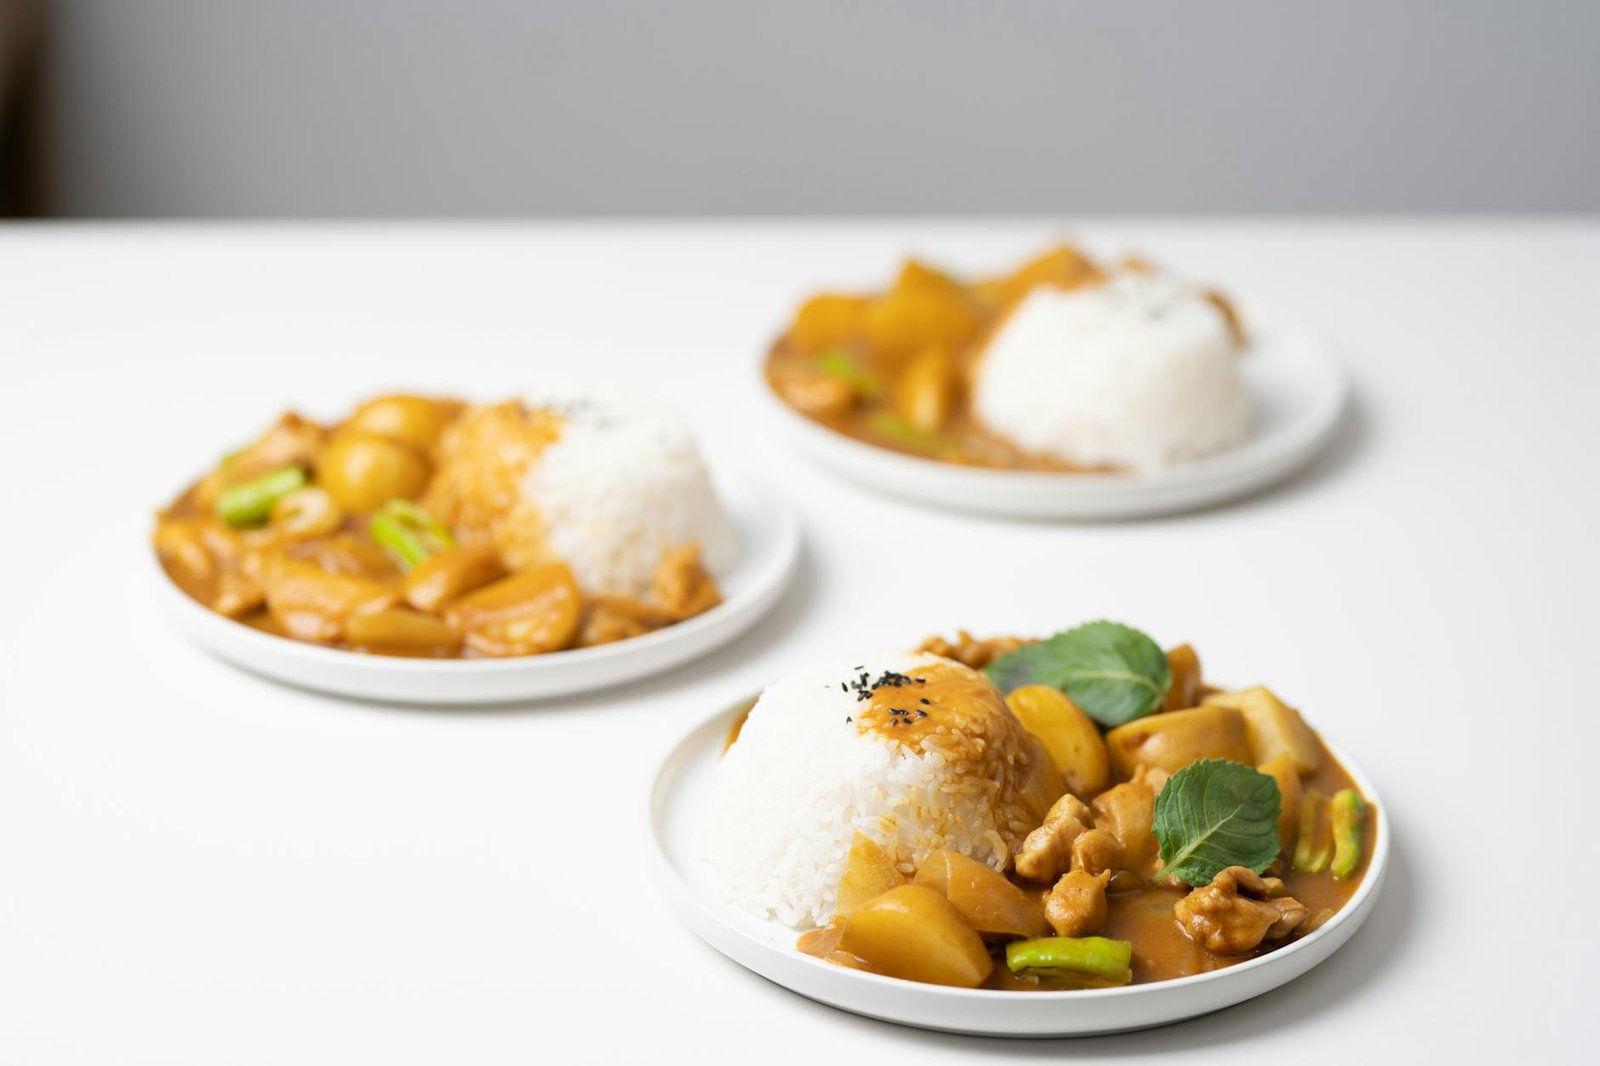 plates with tasty curry placed on white table